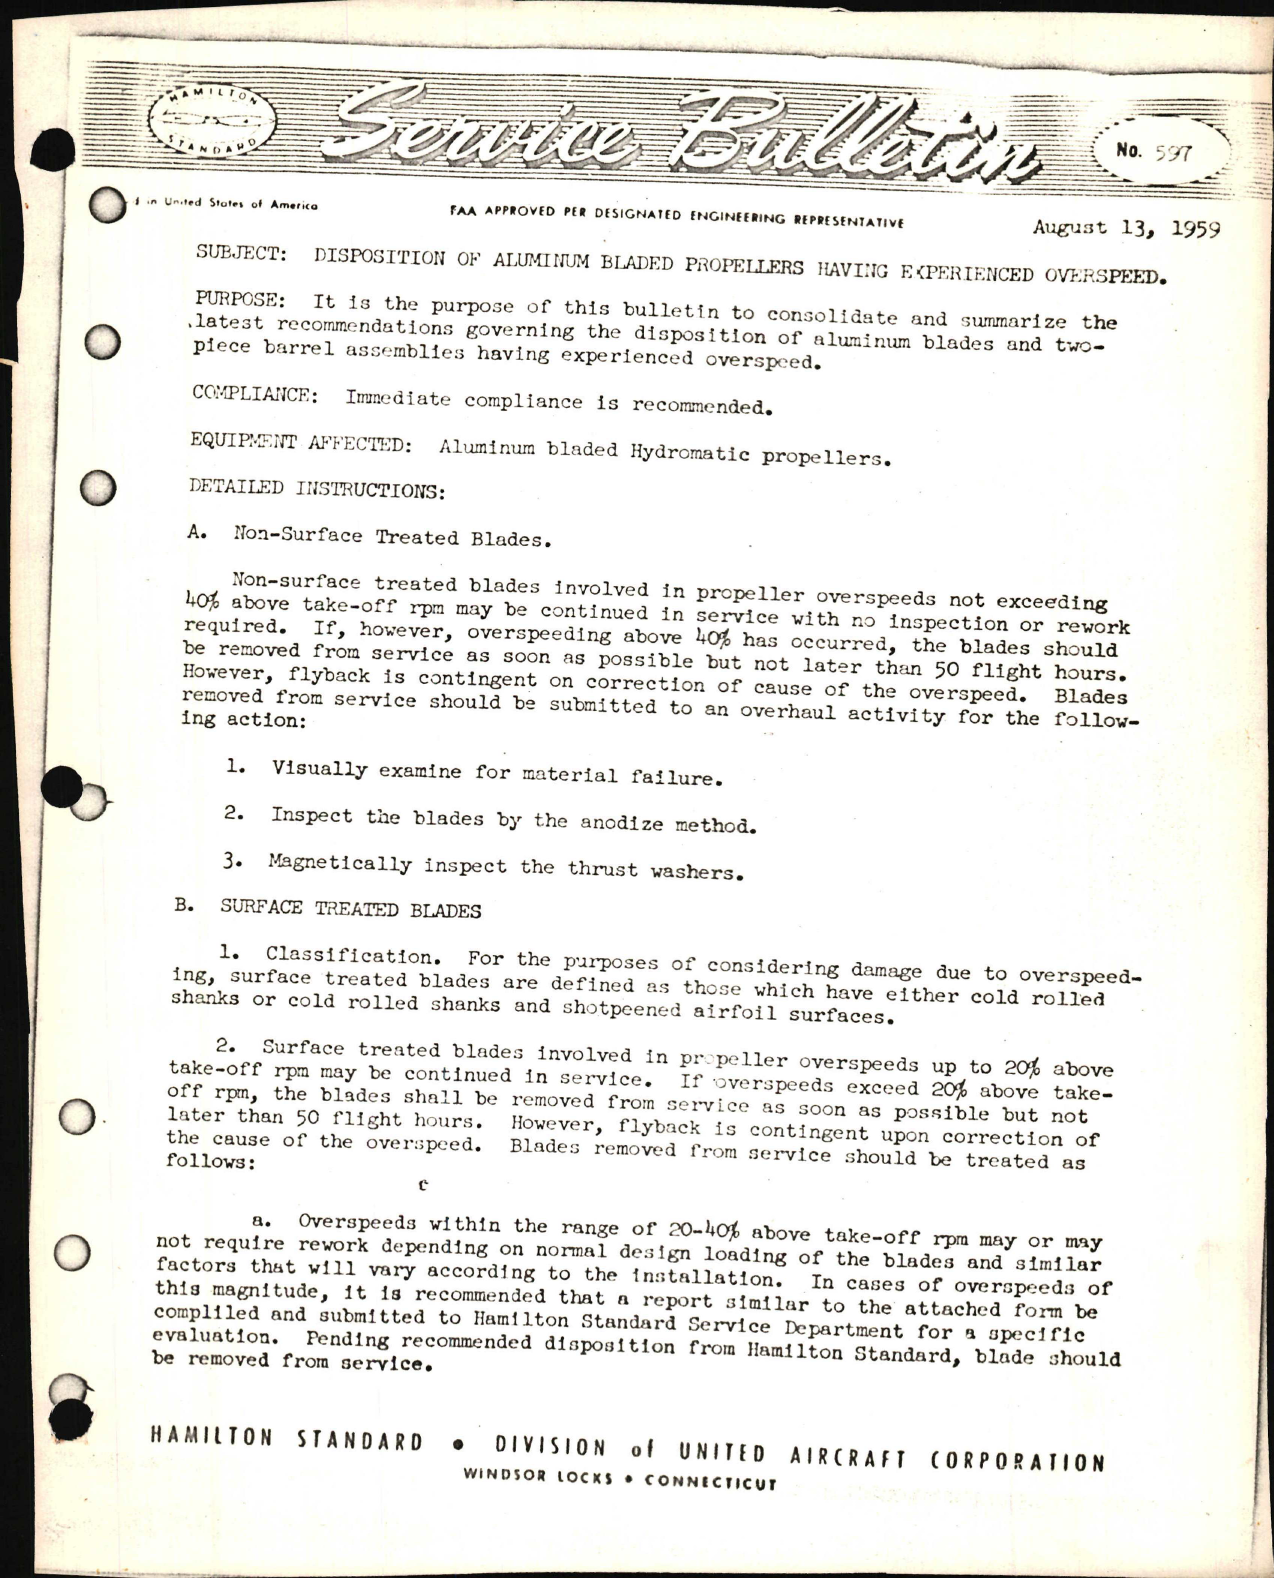 Sample page 1 from AirCorps Library document: Disposition of Aluminum Bladed Propellers Having Experienced Overspeed